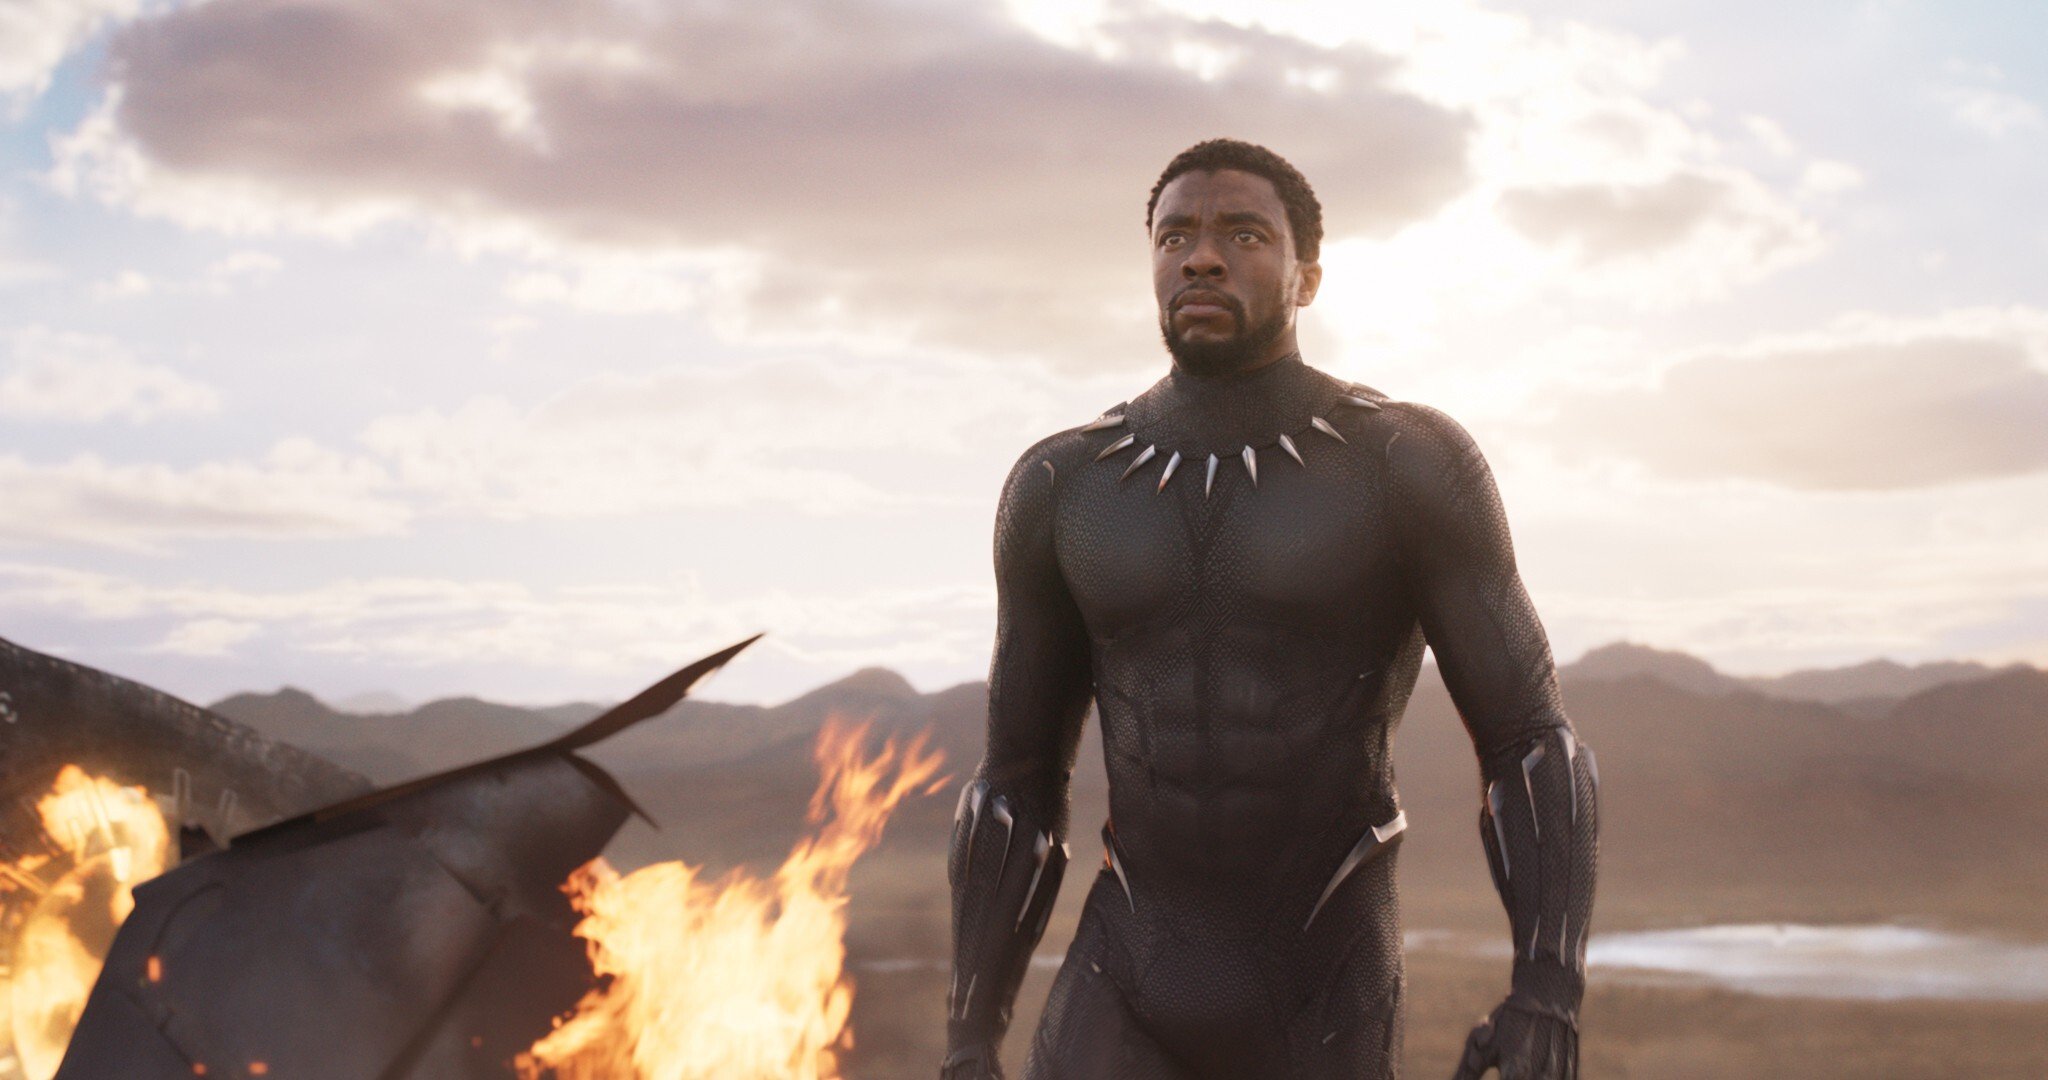 Chadwick Boseman in a still from Black Panther.